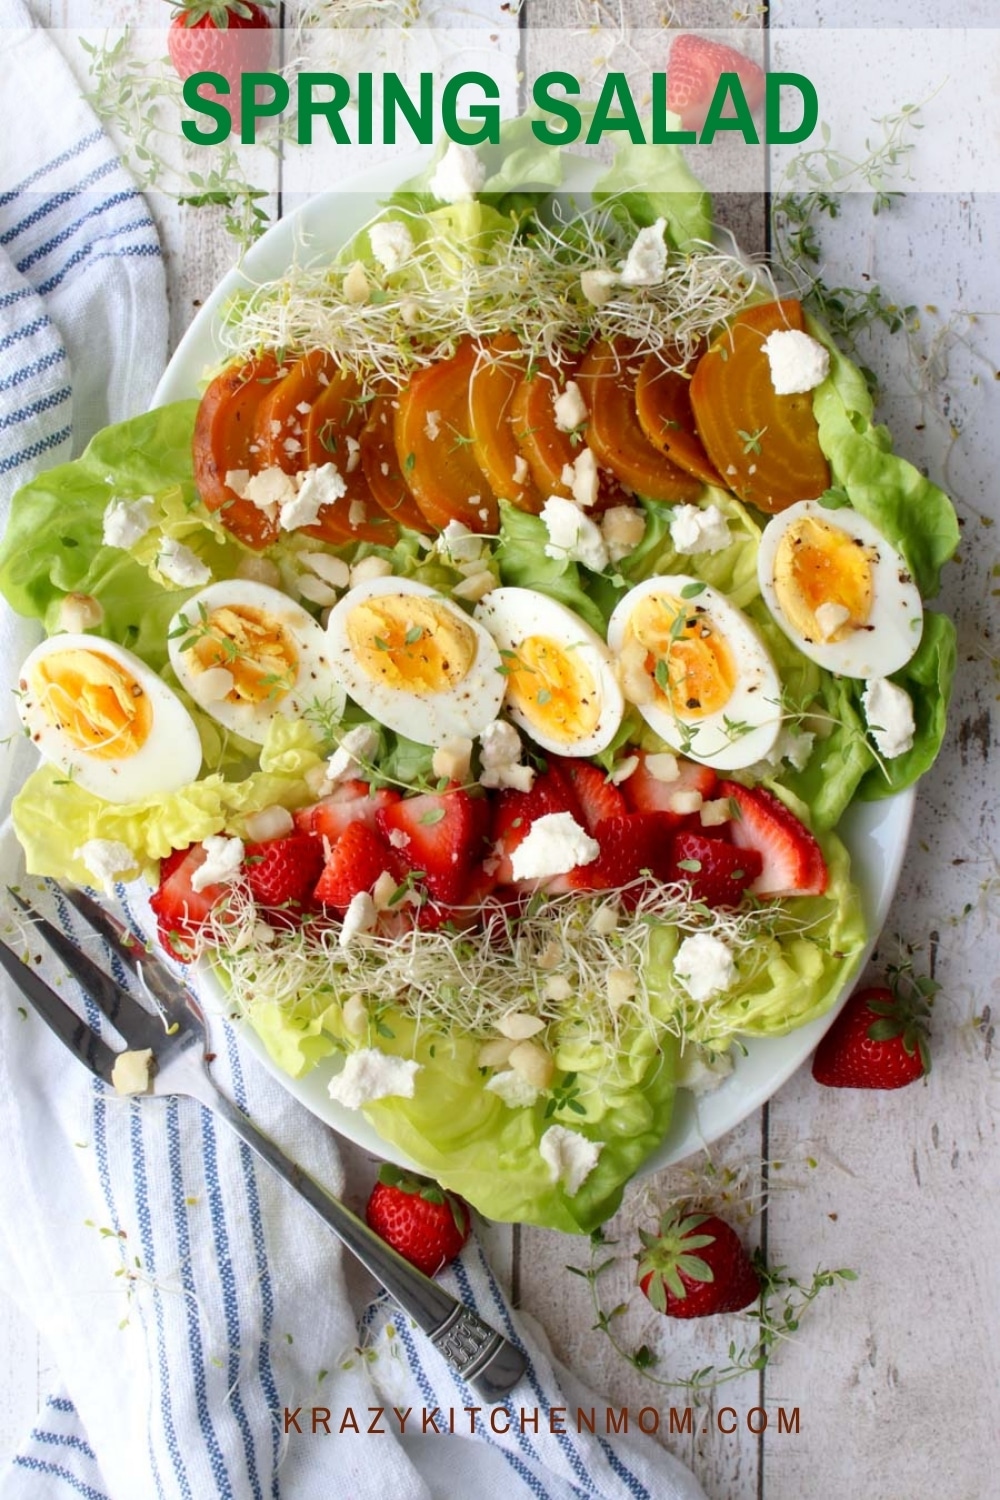 This fresh spring salad filled with soft crispy butter lettuce, strawberries, beets, hard-boiled eggs, and goat cheese will brighten any salad lover's day. via @krazykitchenmom